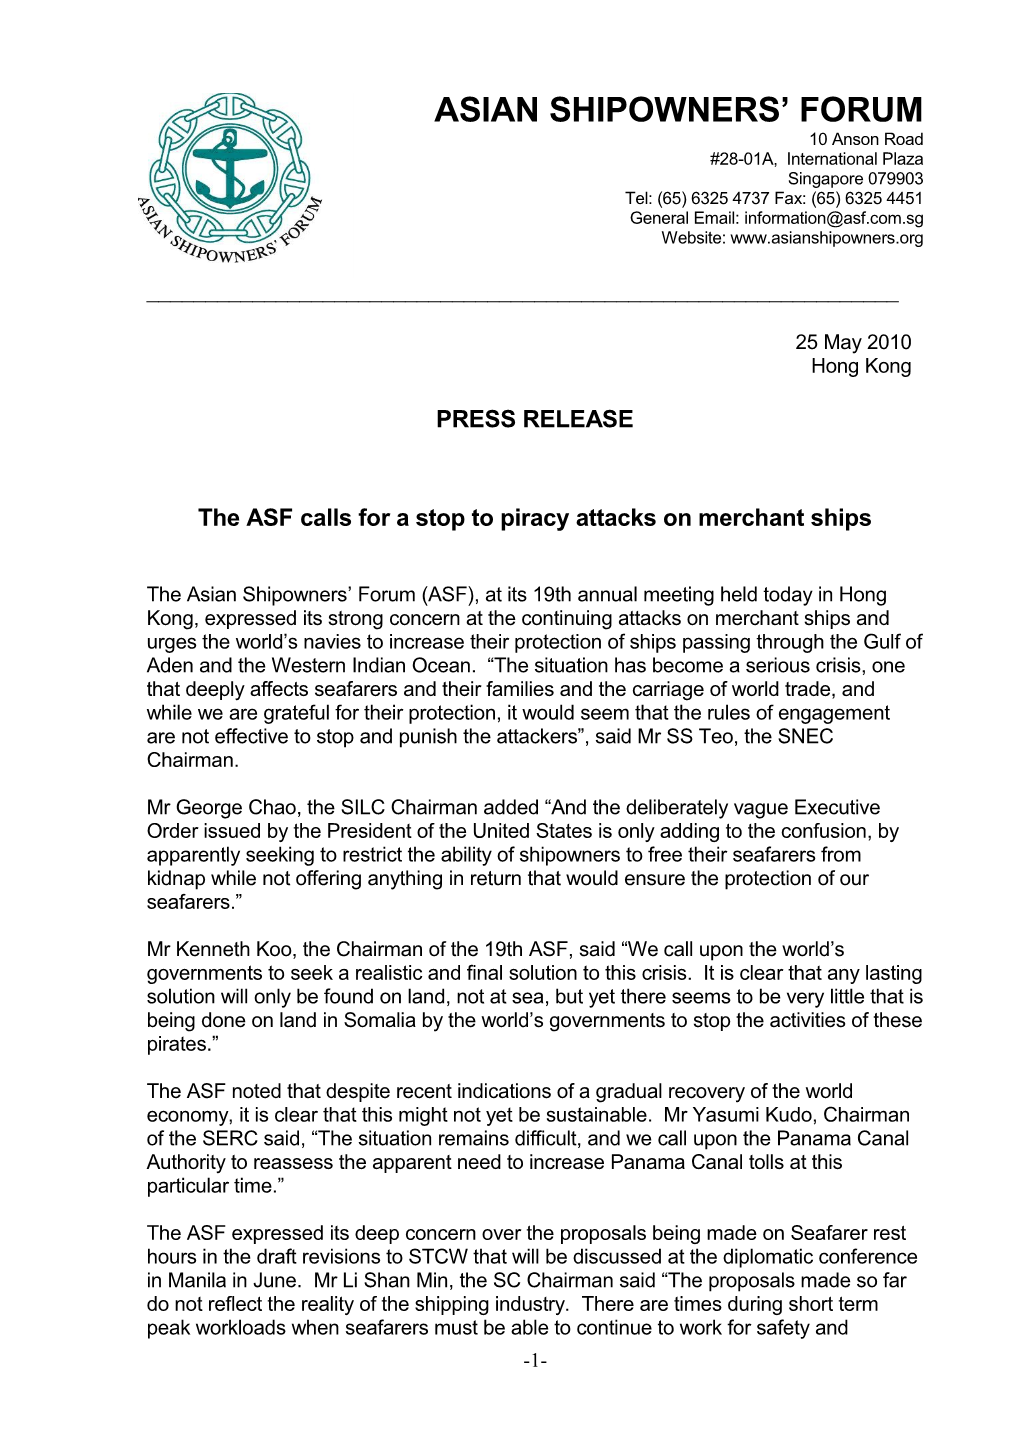 The ASF Calls for a Stop to Piracy Attacks on Merchant Ships